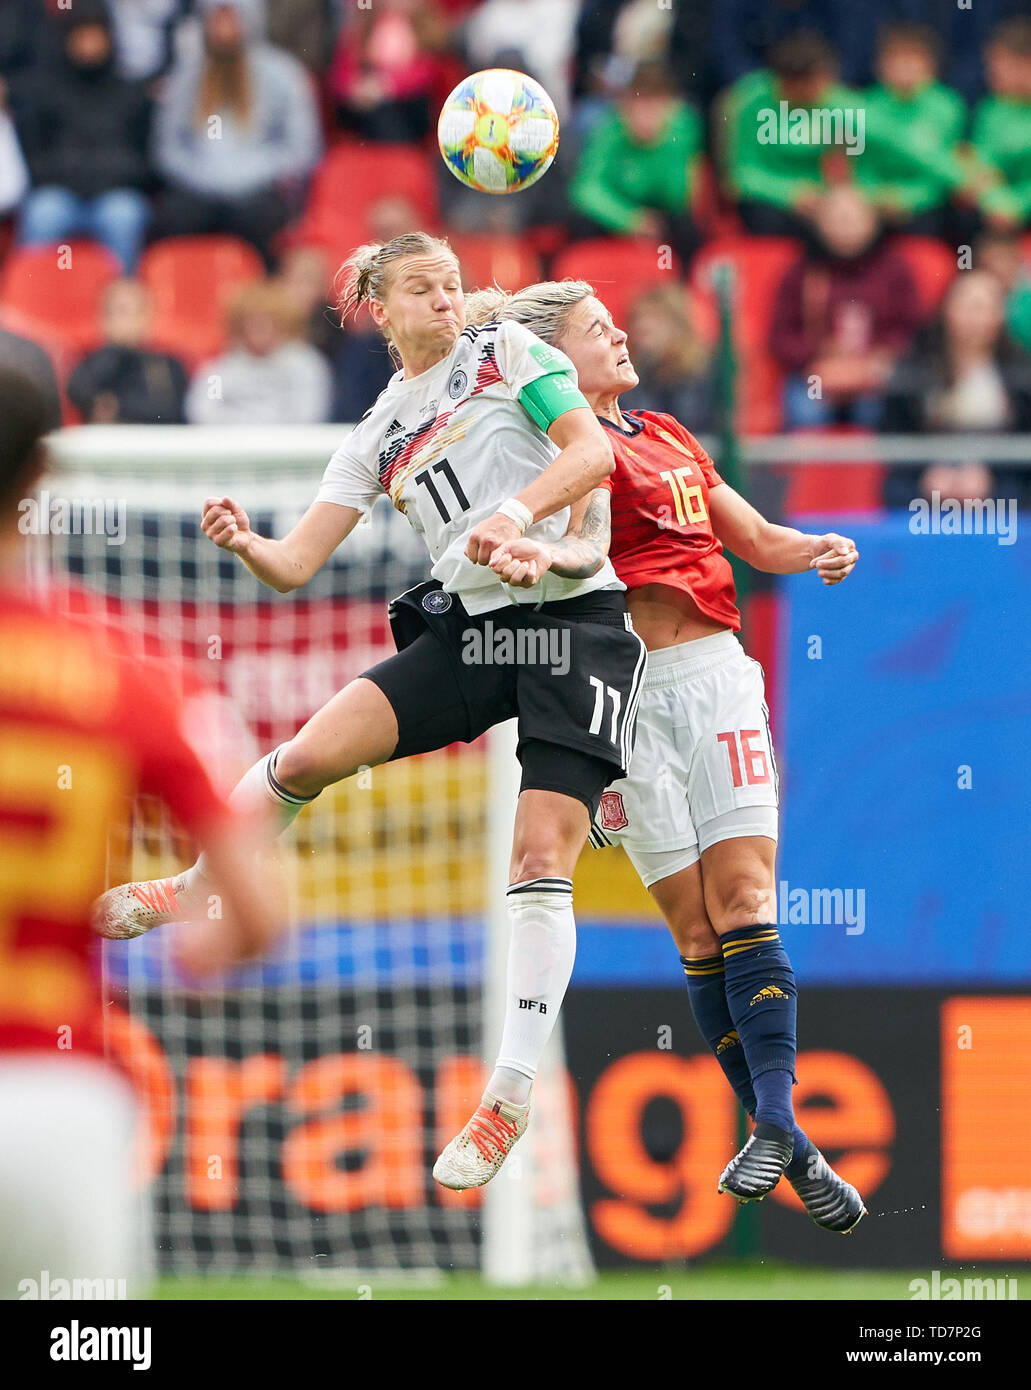 Valenciennes, France. 12th June, 2019. Alexandra POPP, DFB 11 compete for the ball, tackling, duel, header, zweikampf, action, fight against Maria LEON, ESP 16 GERMANY - SPAIN Women FIFA World Cup France Season 2018/2019, June 12, 2019 in Valenciennes, France. Credit: Peter Schatz/Alamy Live News Stock Photo